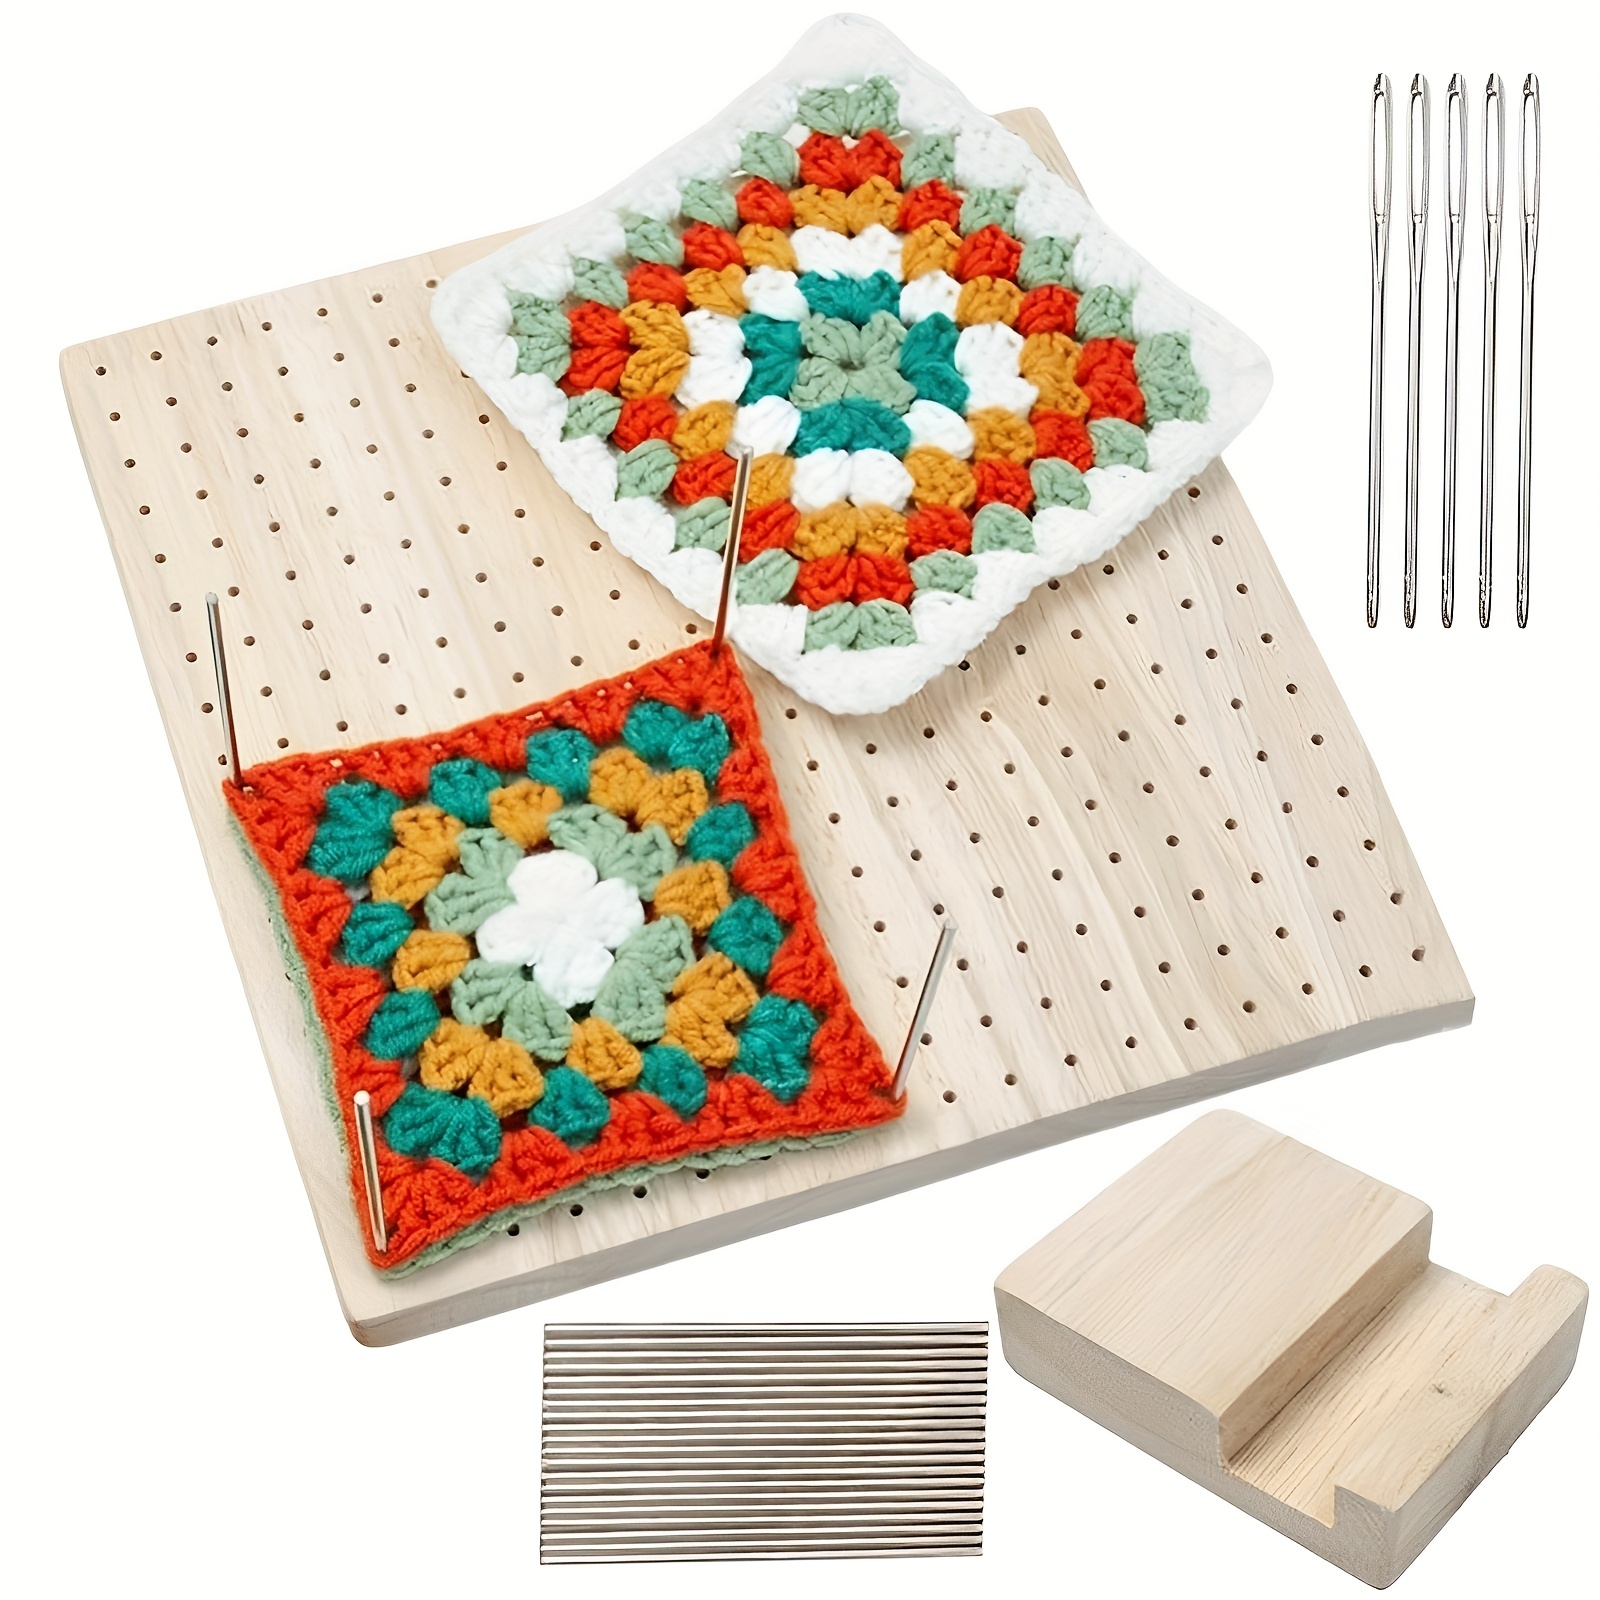 Knit Blocking Pins Kit, Knit Blocking Combs, Combs For Blocking Knitting,  Crochet, Lace Or Needlework Projects,extra 100 T-pins, For Use With  Blocking Mats For Knitting Mat - Temu Denmark